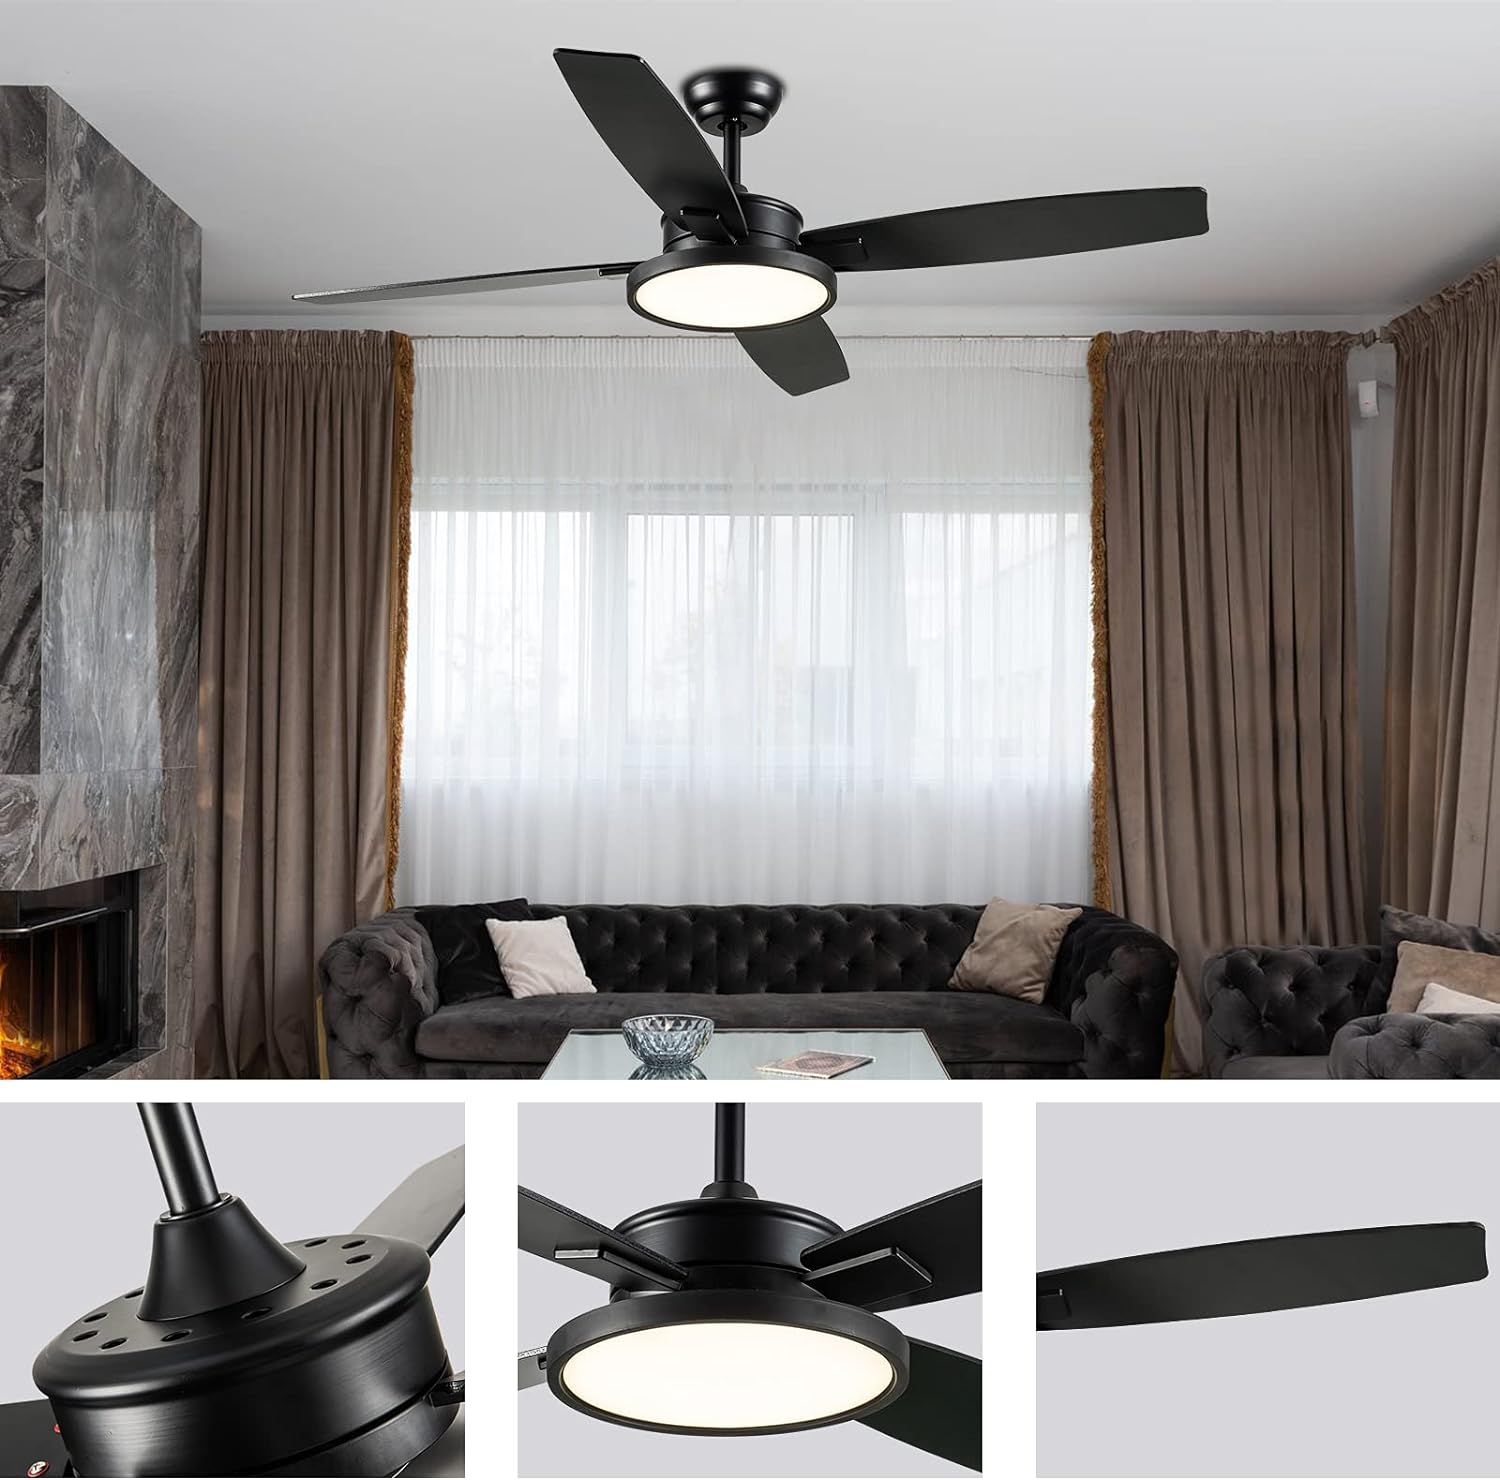 BRTLX 52'' Black Ceiling Fans with Lights, Indoor Outdoor Ceiling Fan with Remote Control, 4 Blades 3-Speed Noiseless Reversible Moto